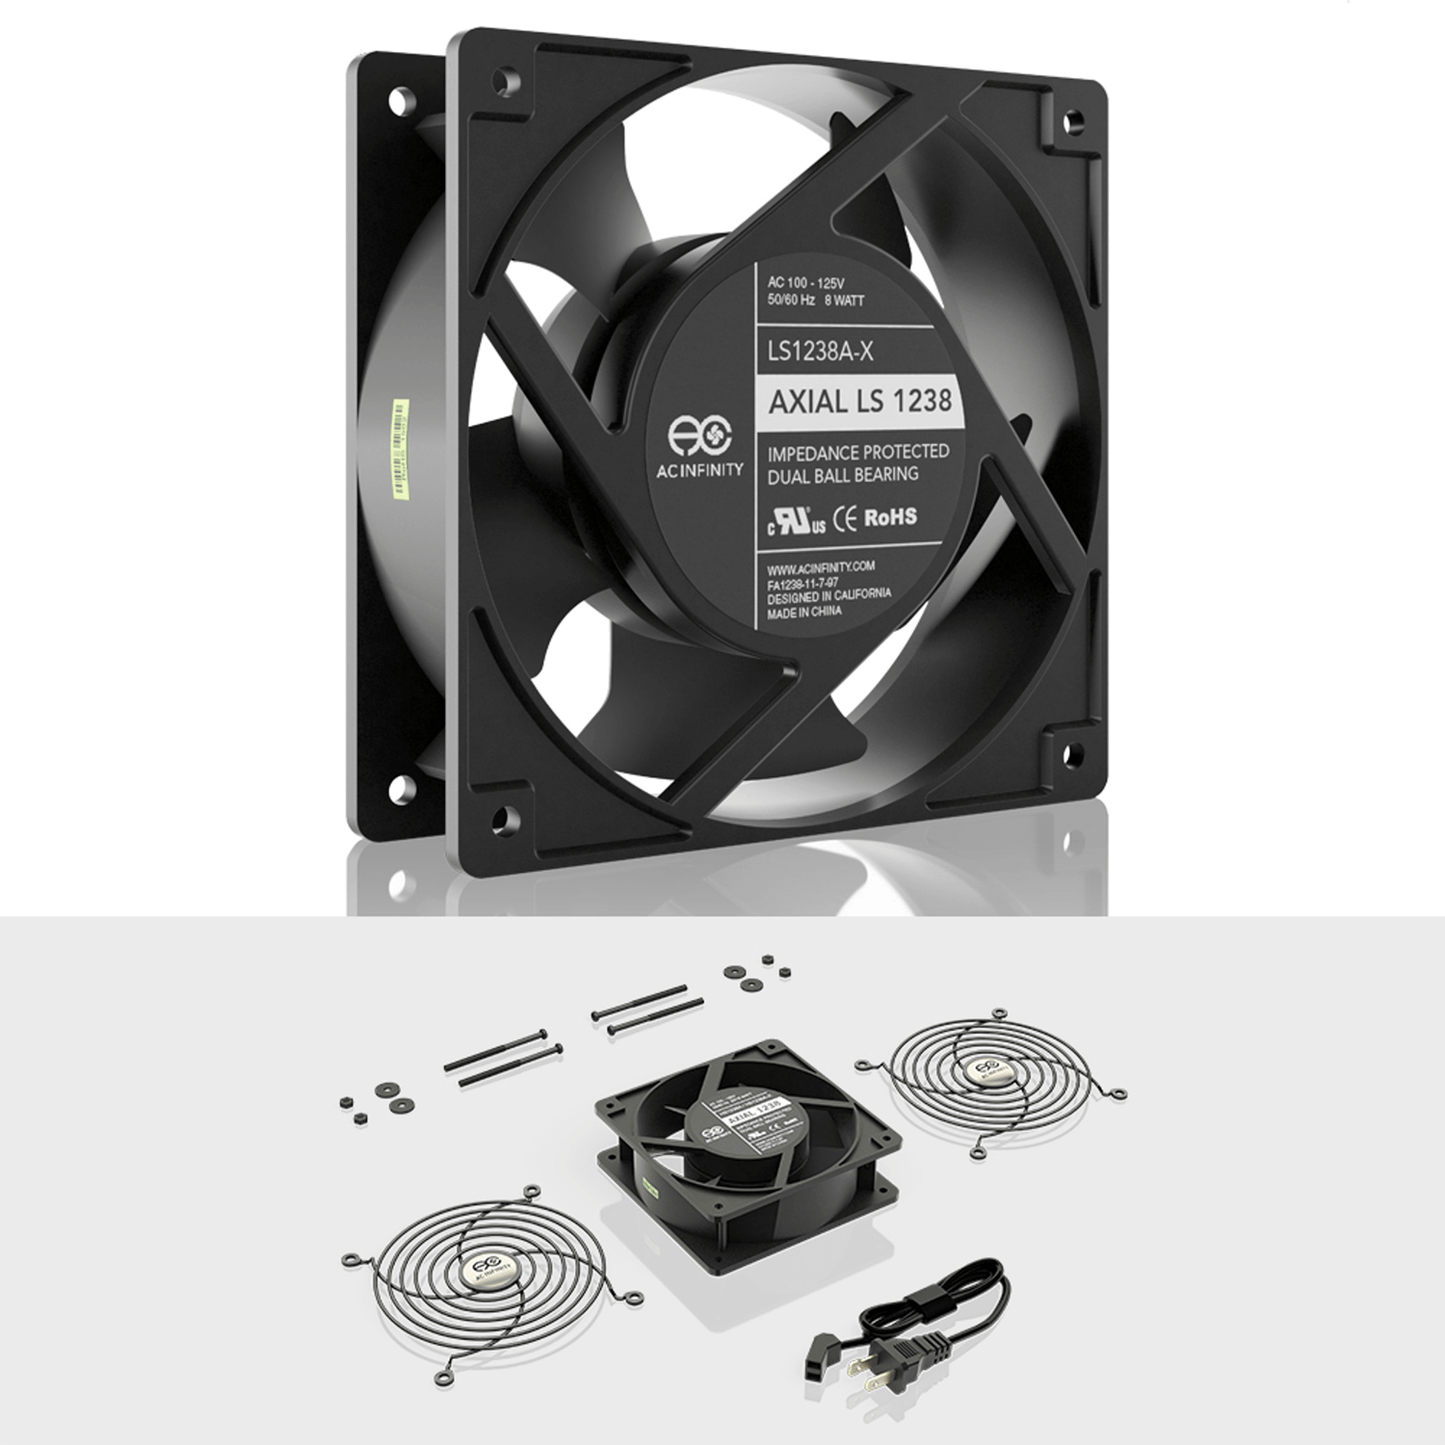 AC Infinity AXIAL LS1238, Muffin 120V AC Cooling Fan, 120mm x 120mm x 38mm, Low Speed LS1238A-X Climate Control 819137020542